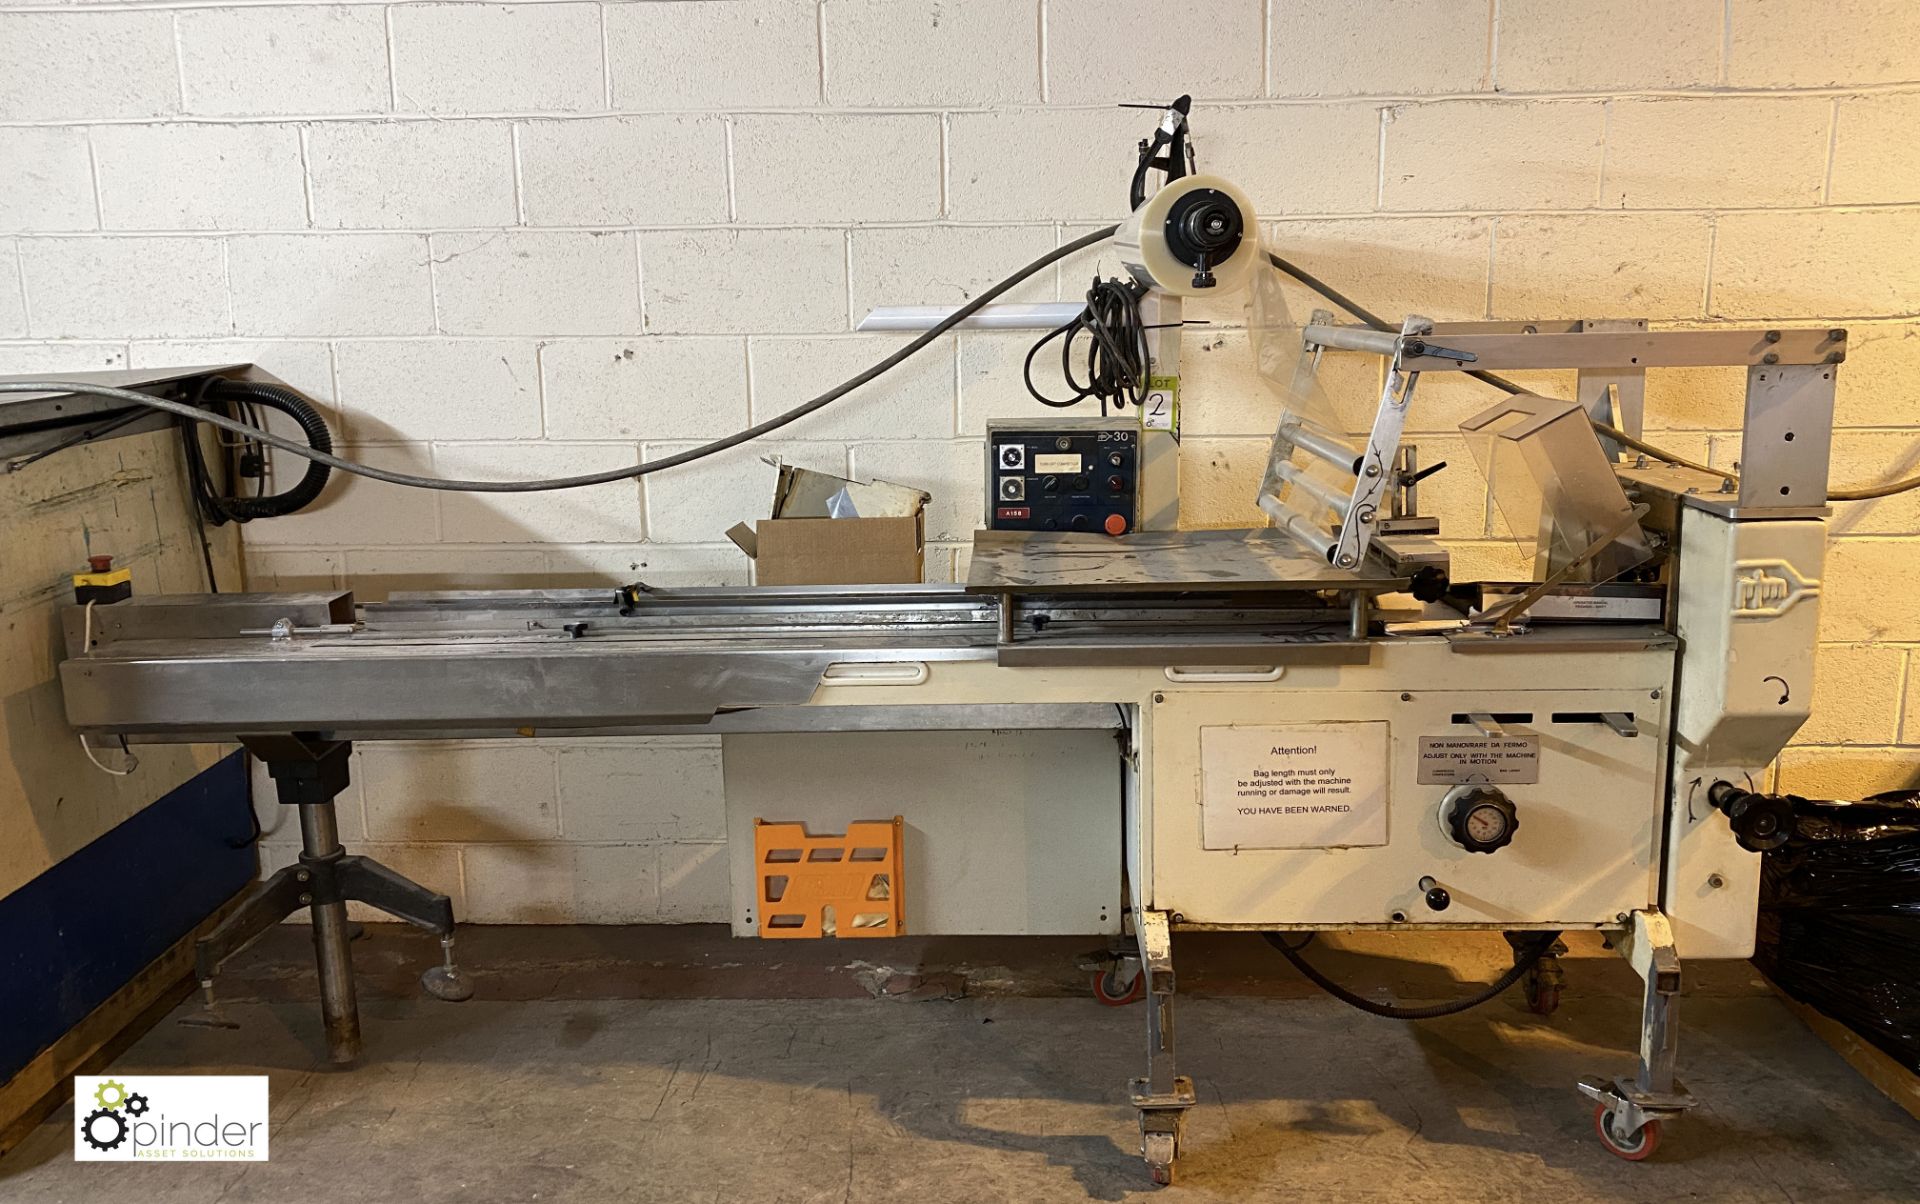 PFM30 Flow Wrapper, 45 products/min max, wrapping dimensions length 350mm, width 170mm, height